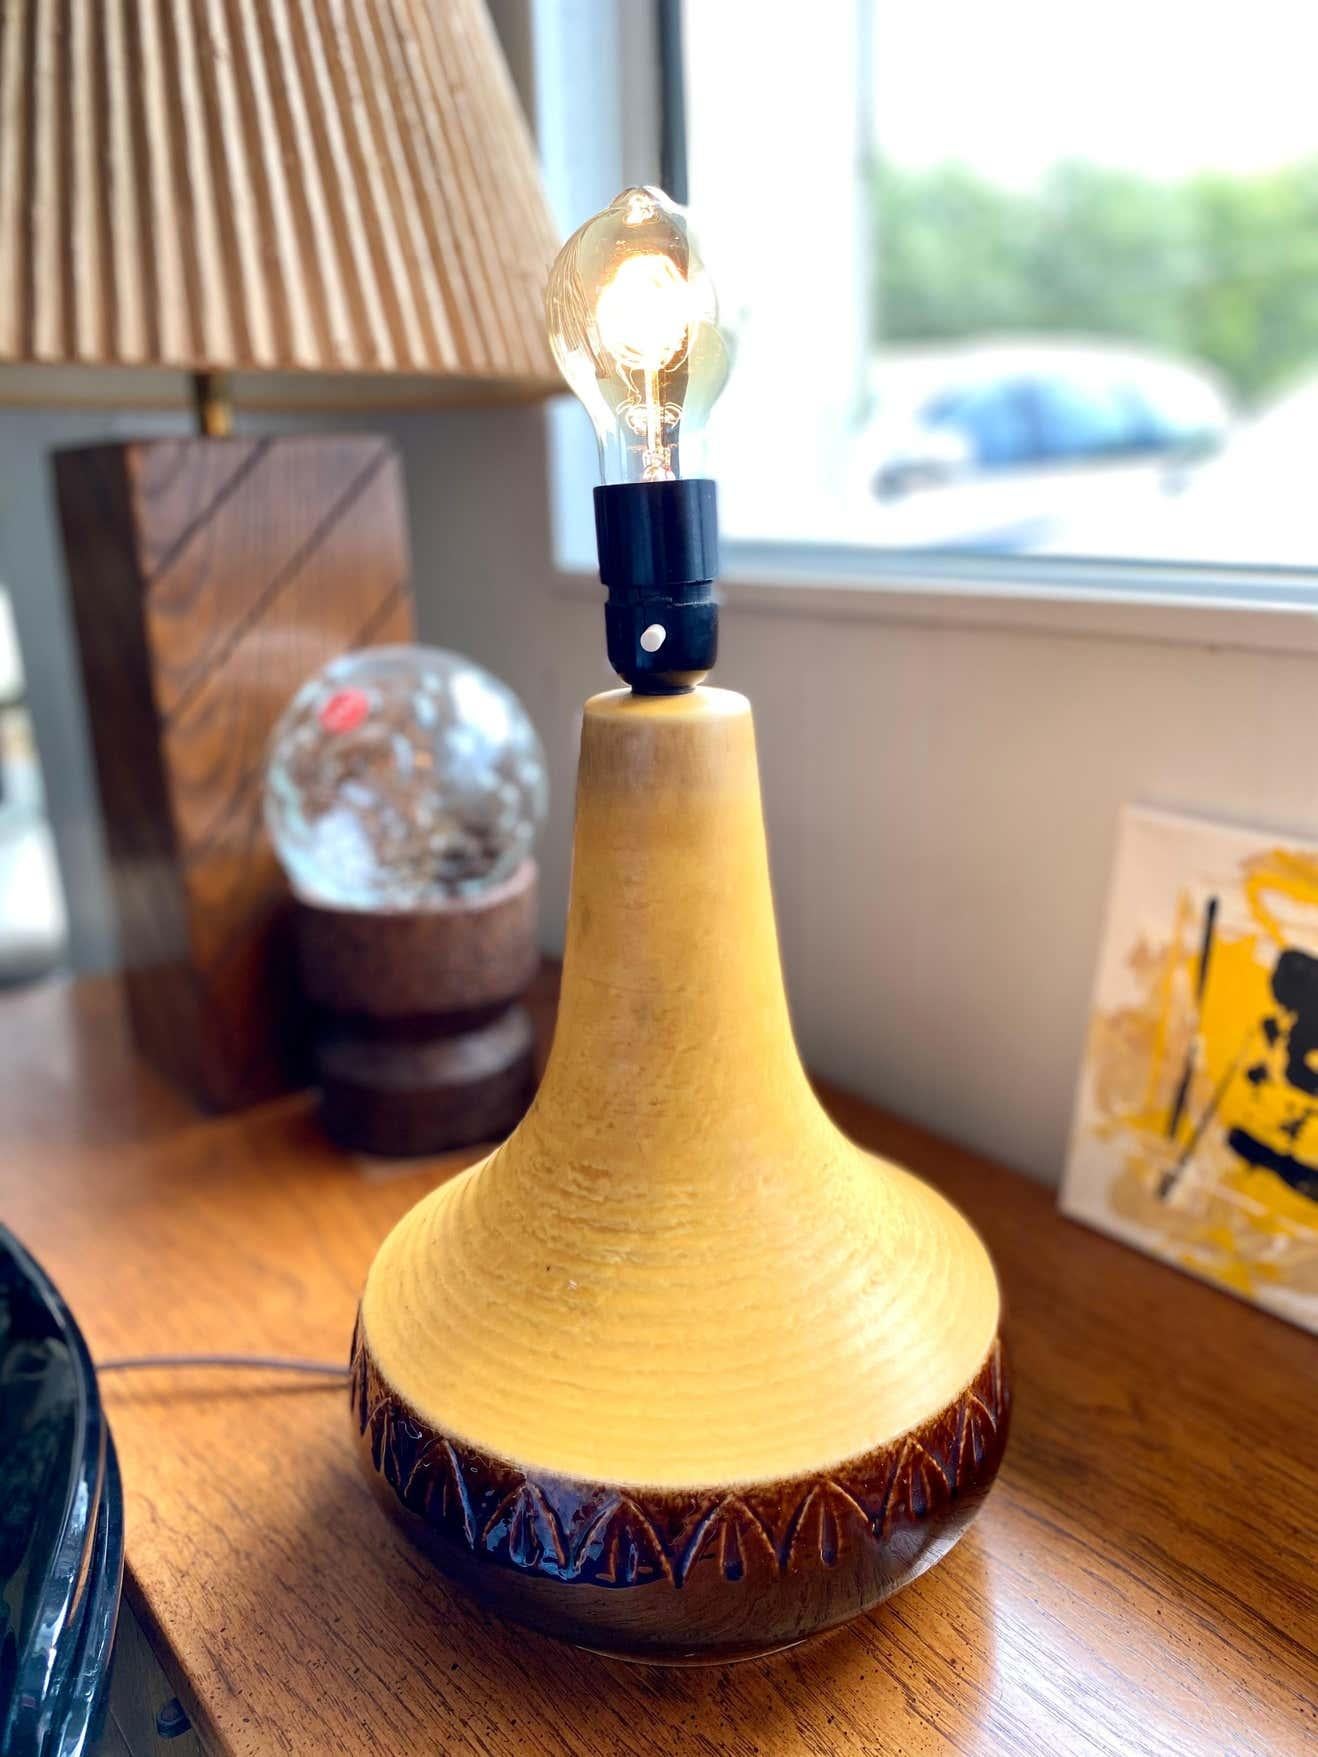 Beautiful Søholm hand-crafted ceramic table lamp in a vibrant yellow with a brown glazed base. The range of pottery produced by Soholm during the 20th Century was immense. It was one of the largest and longest surviving potteries on the island of